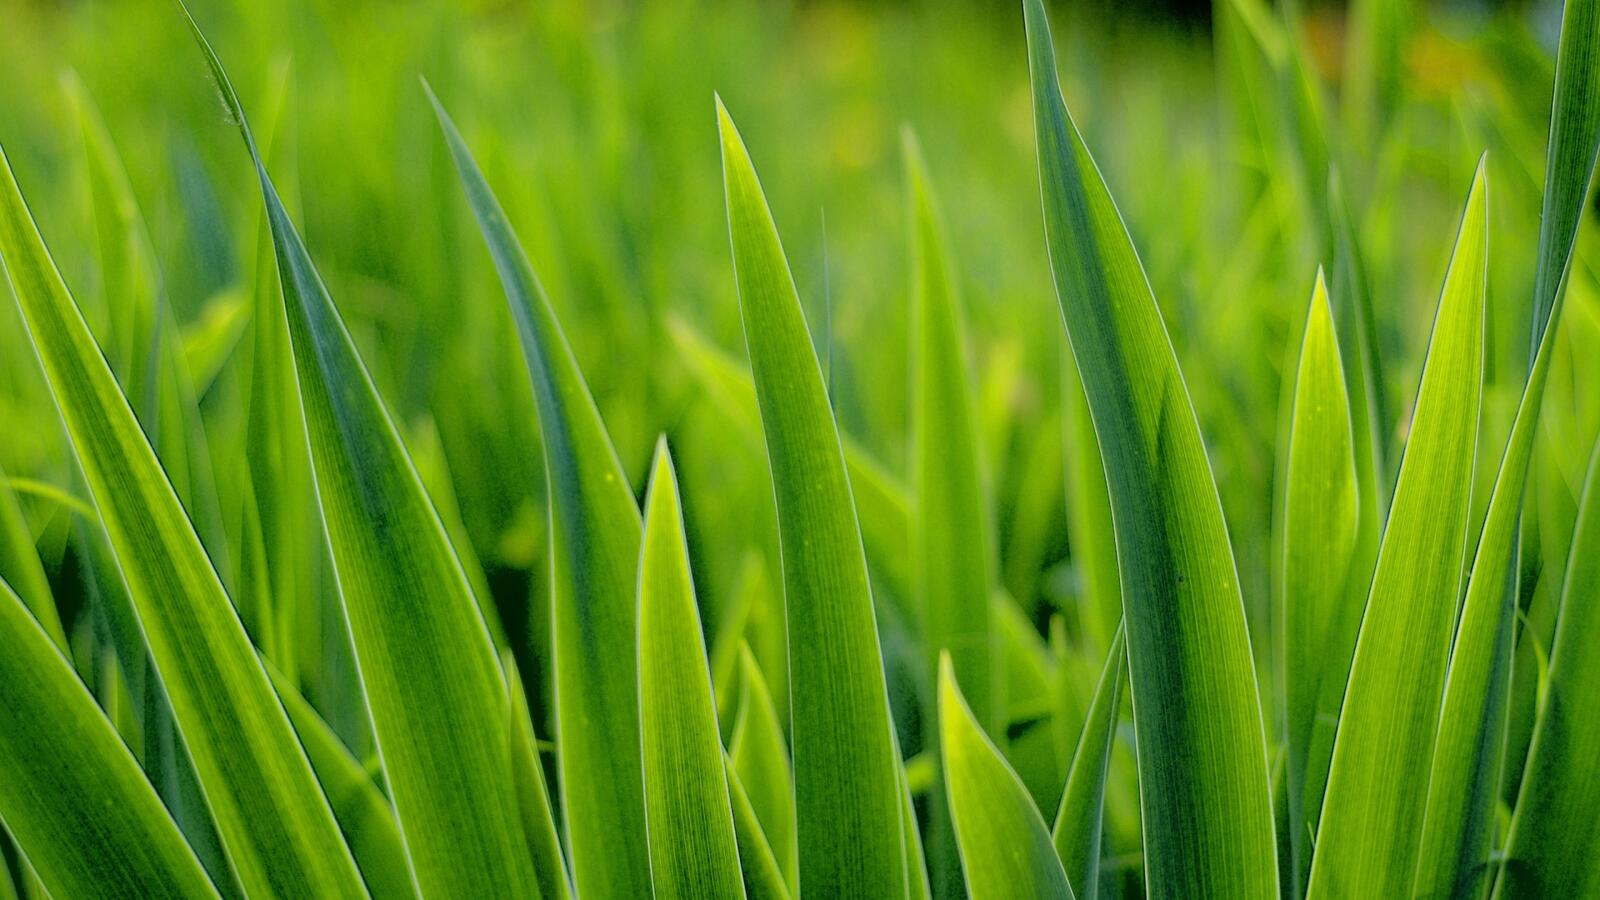 Wallpapers grass many leaves on the desktop